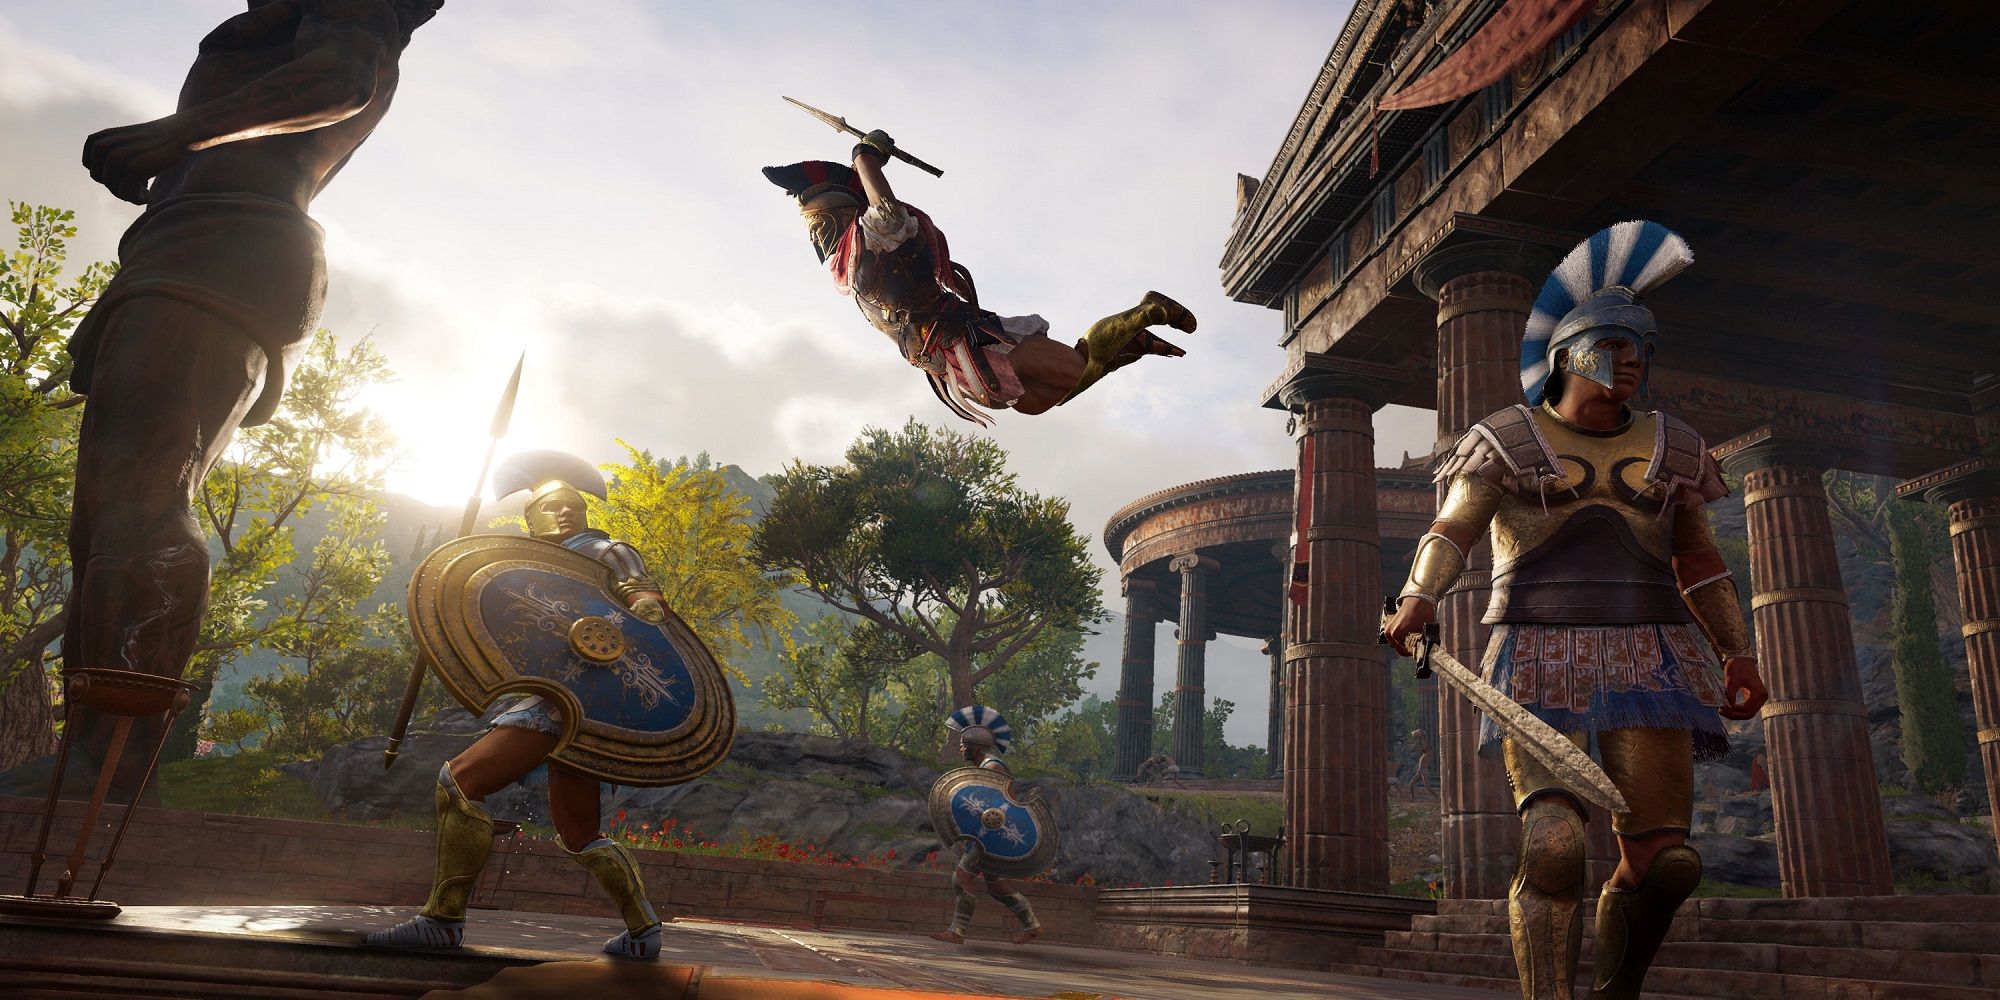 A player armed with a spear leaping towards an Athenian soldier in Assassin's Creed Odyssey side mission The Great Contender